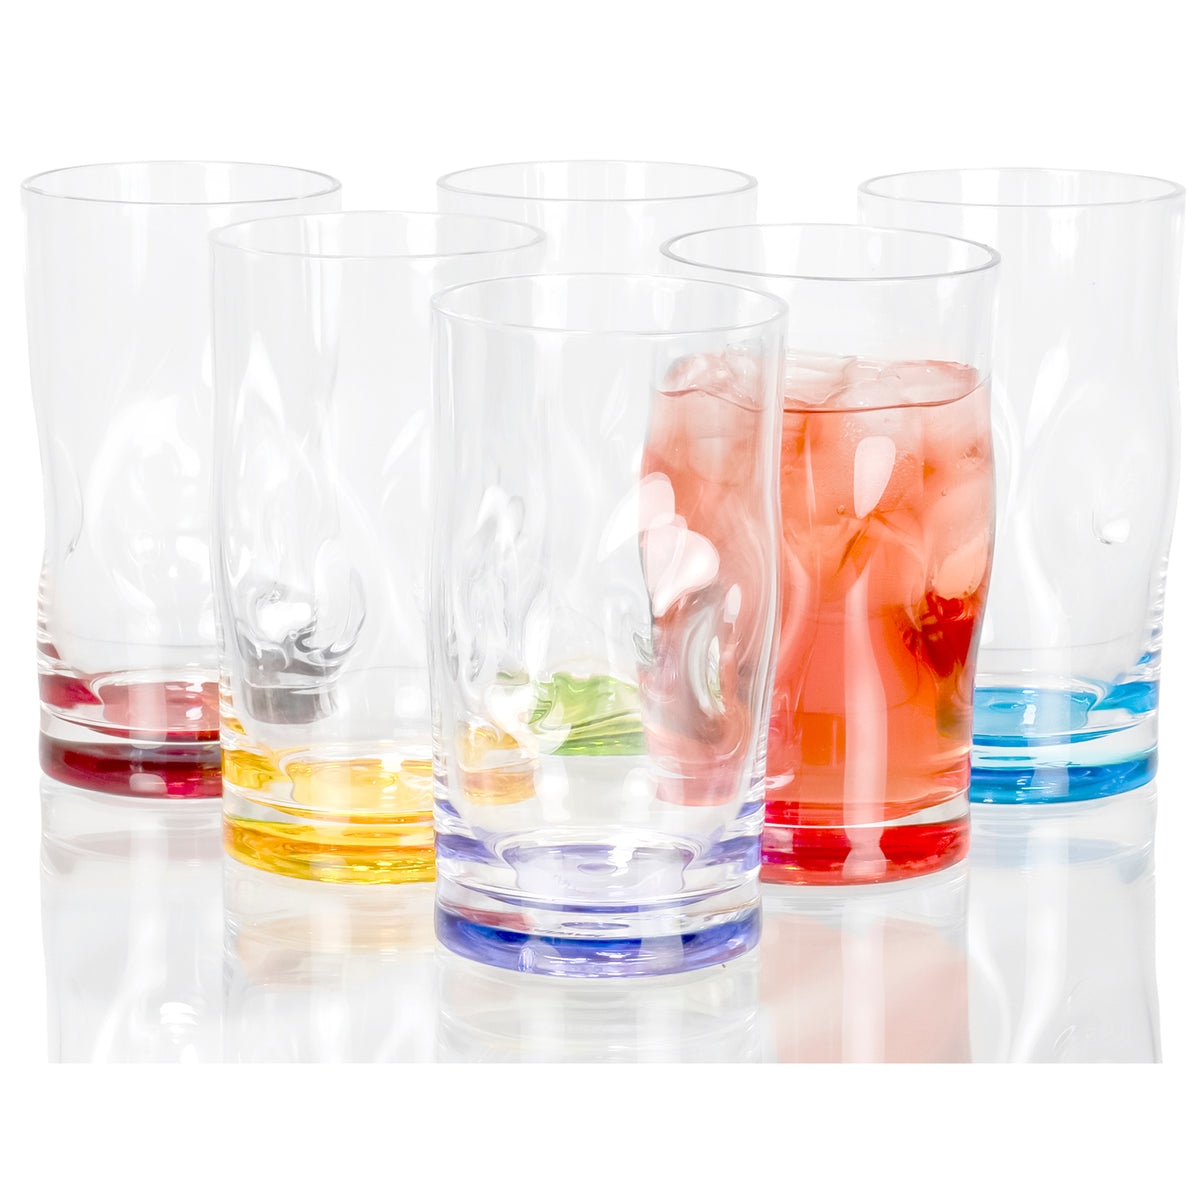 Clearance Wavy Glass Cup Vintage Drinking Glasses Entertainment Dinnerware  Glassware Beverage Cups for Water, Fruit Juice, Wine Beer Kitchen Bar Decor